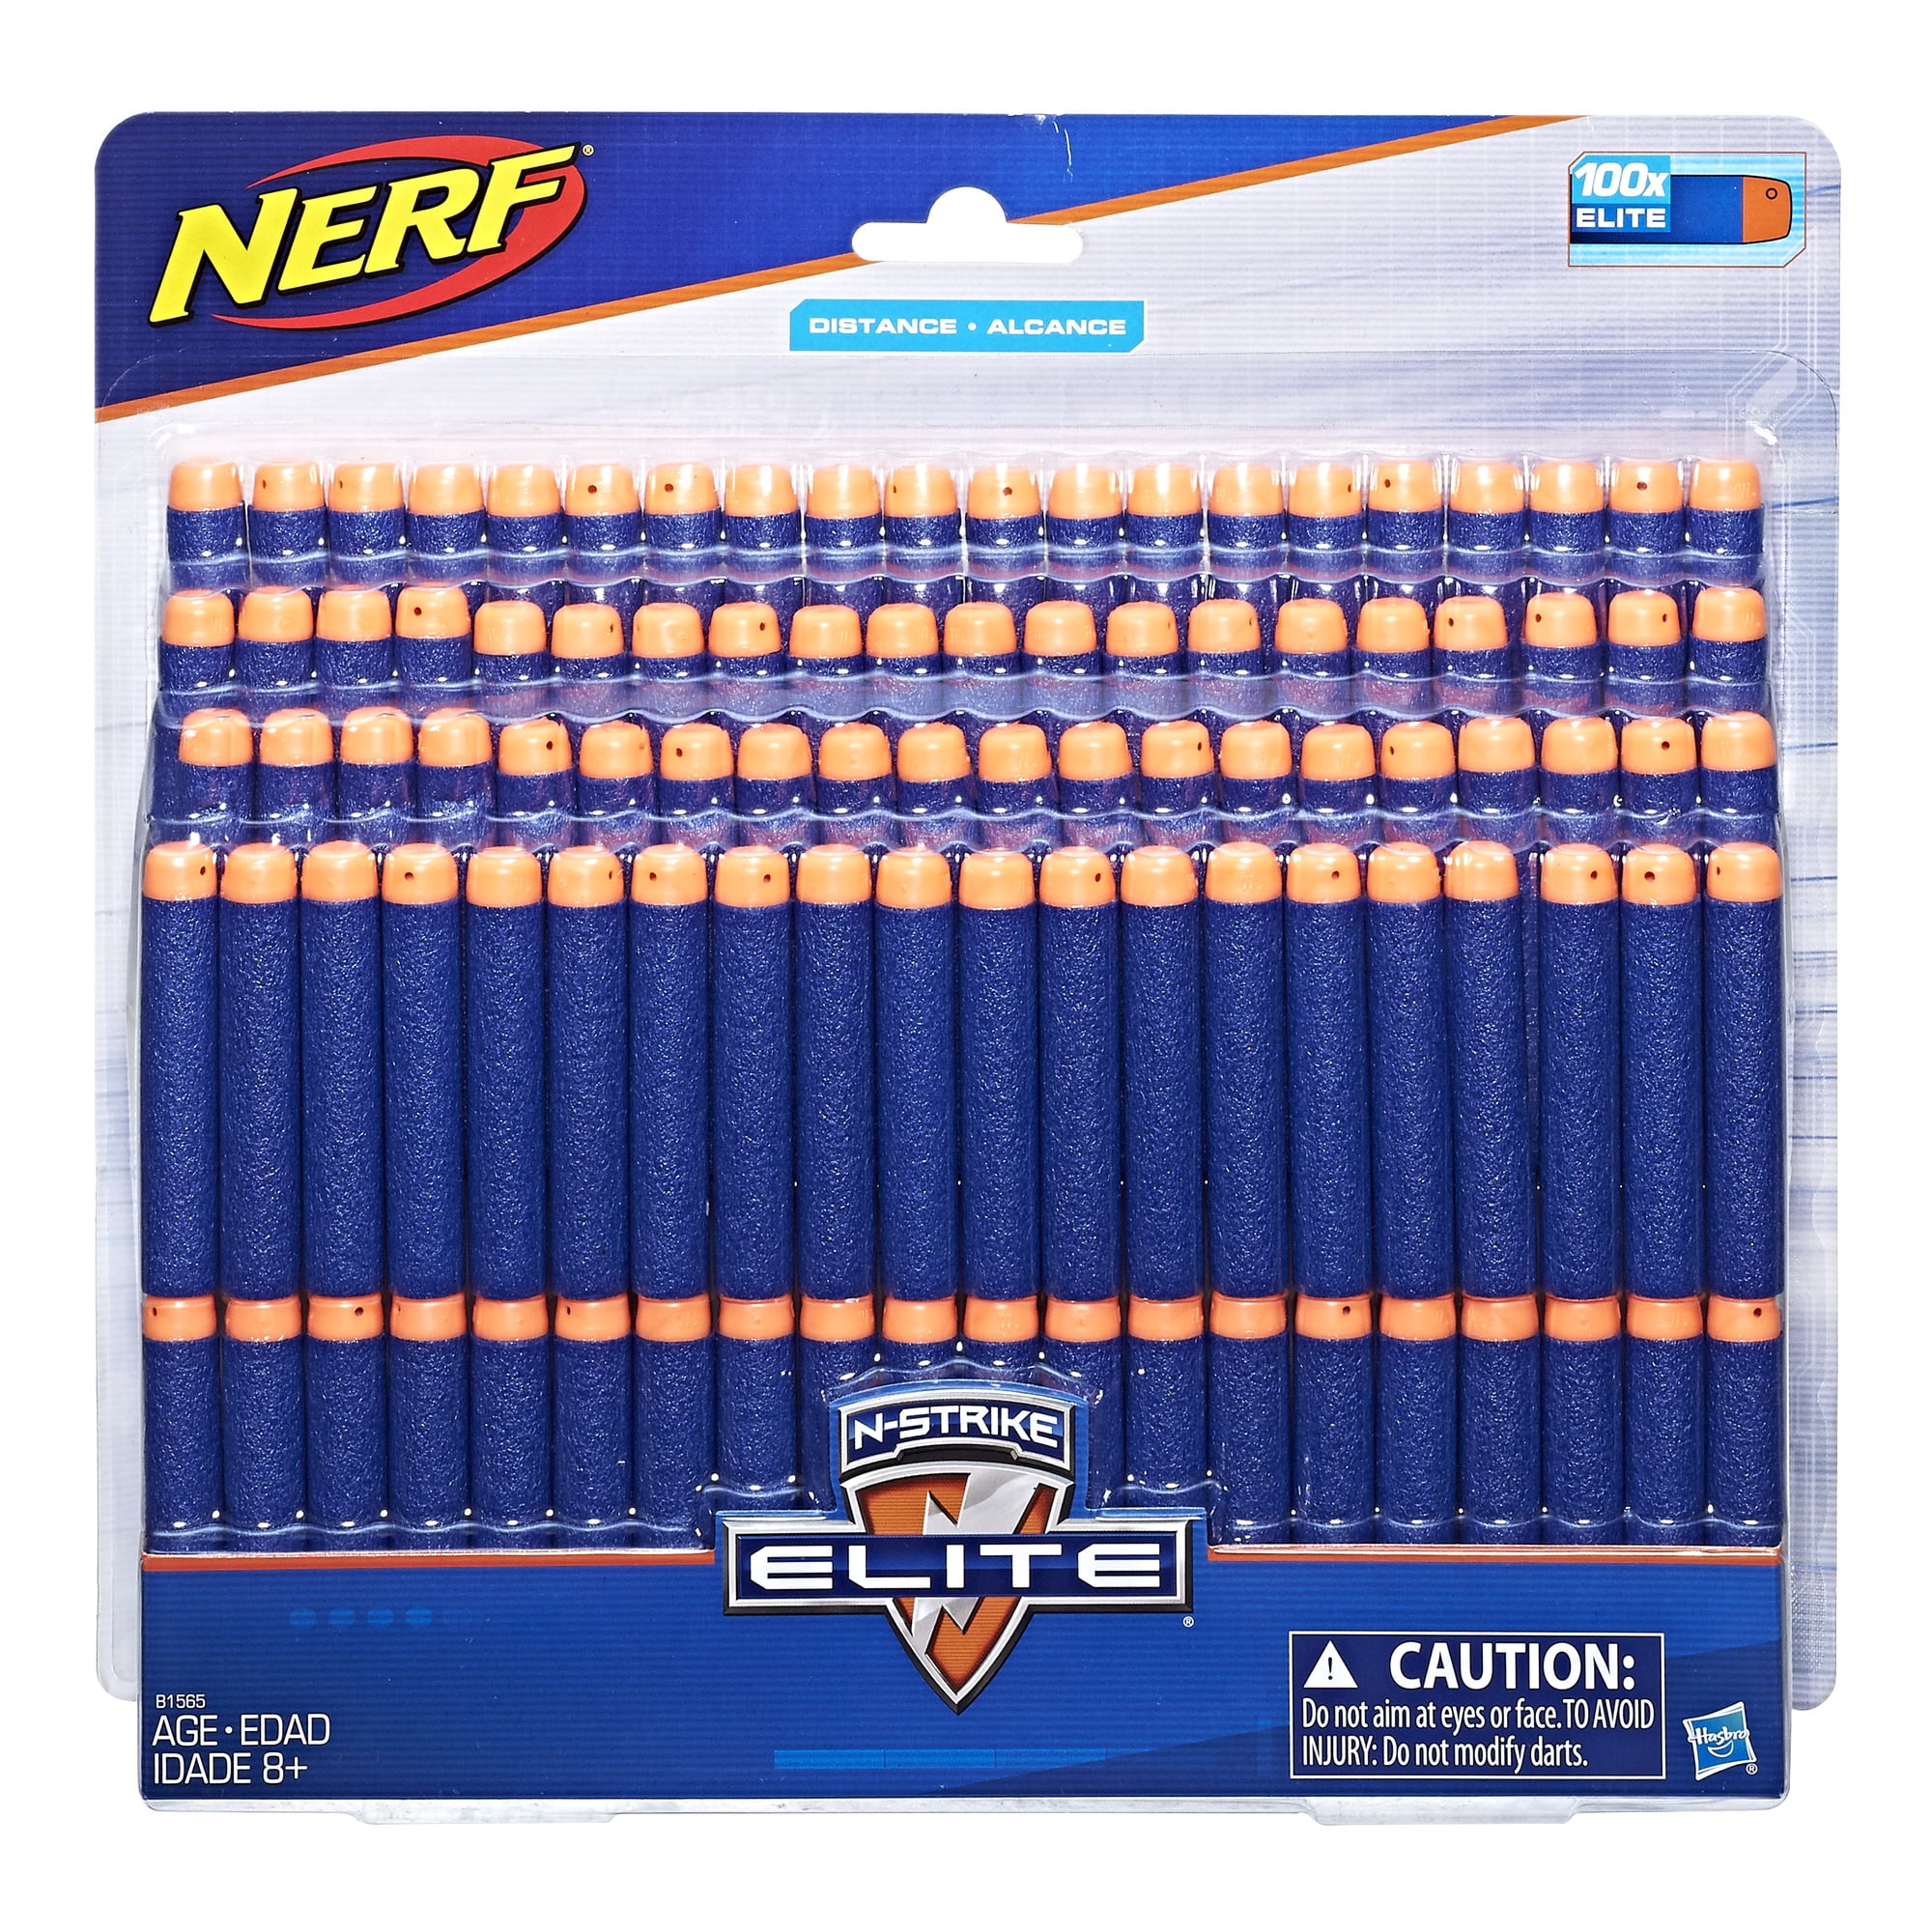 Refill Bullet Darts for N-strike Series Blasters Game Toy Black Hot 50pc TW 